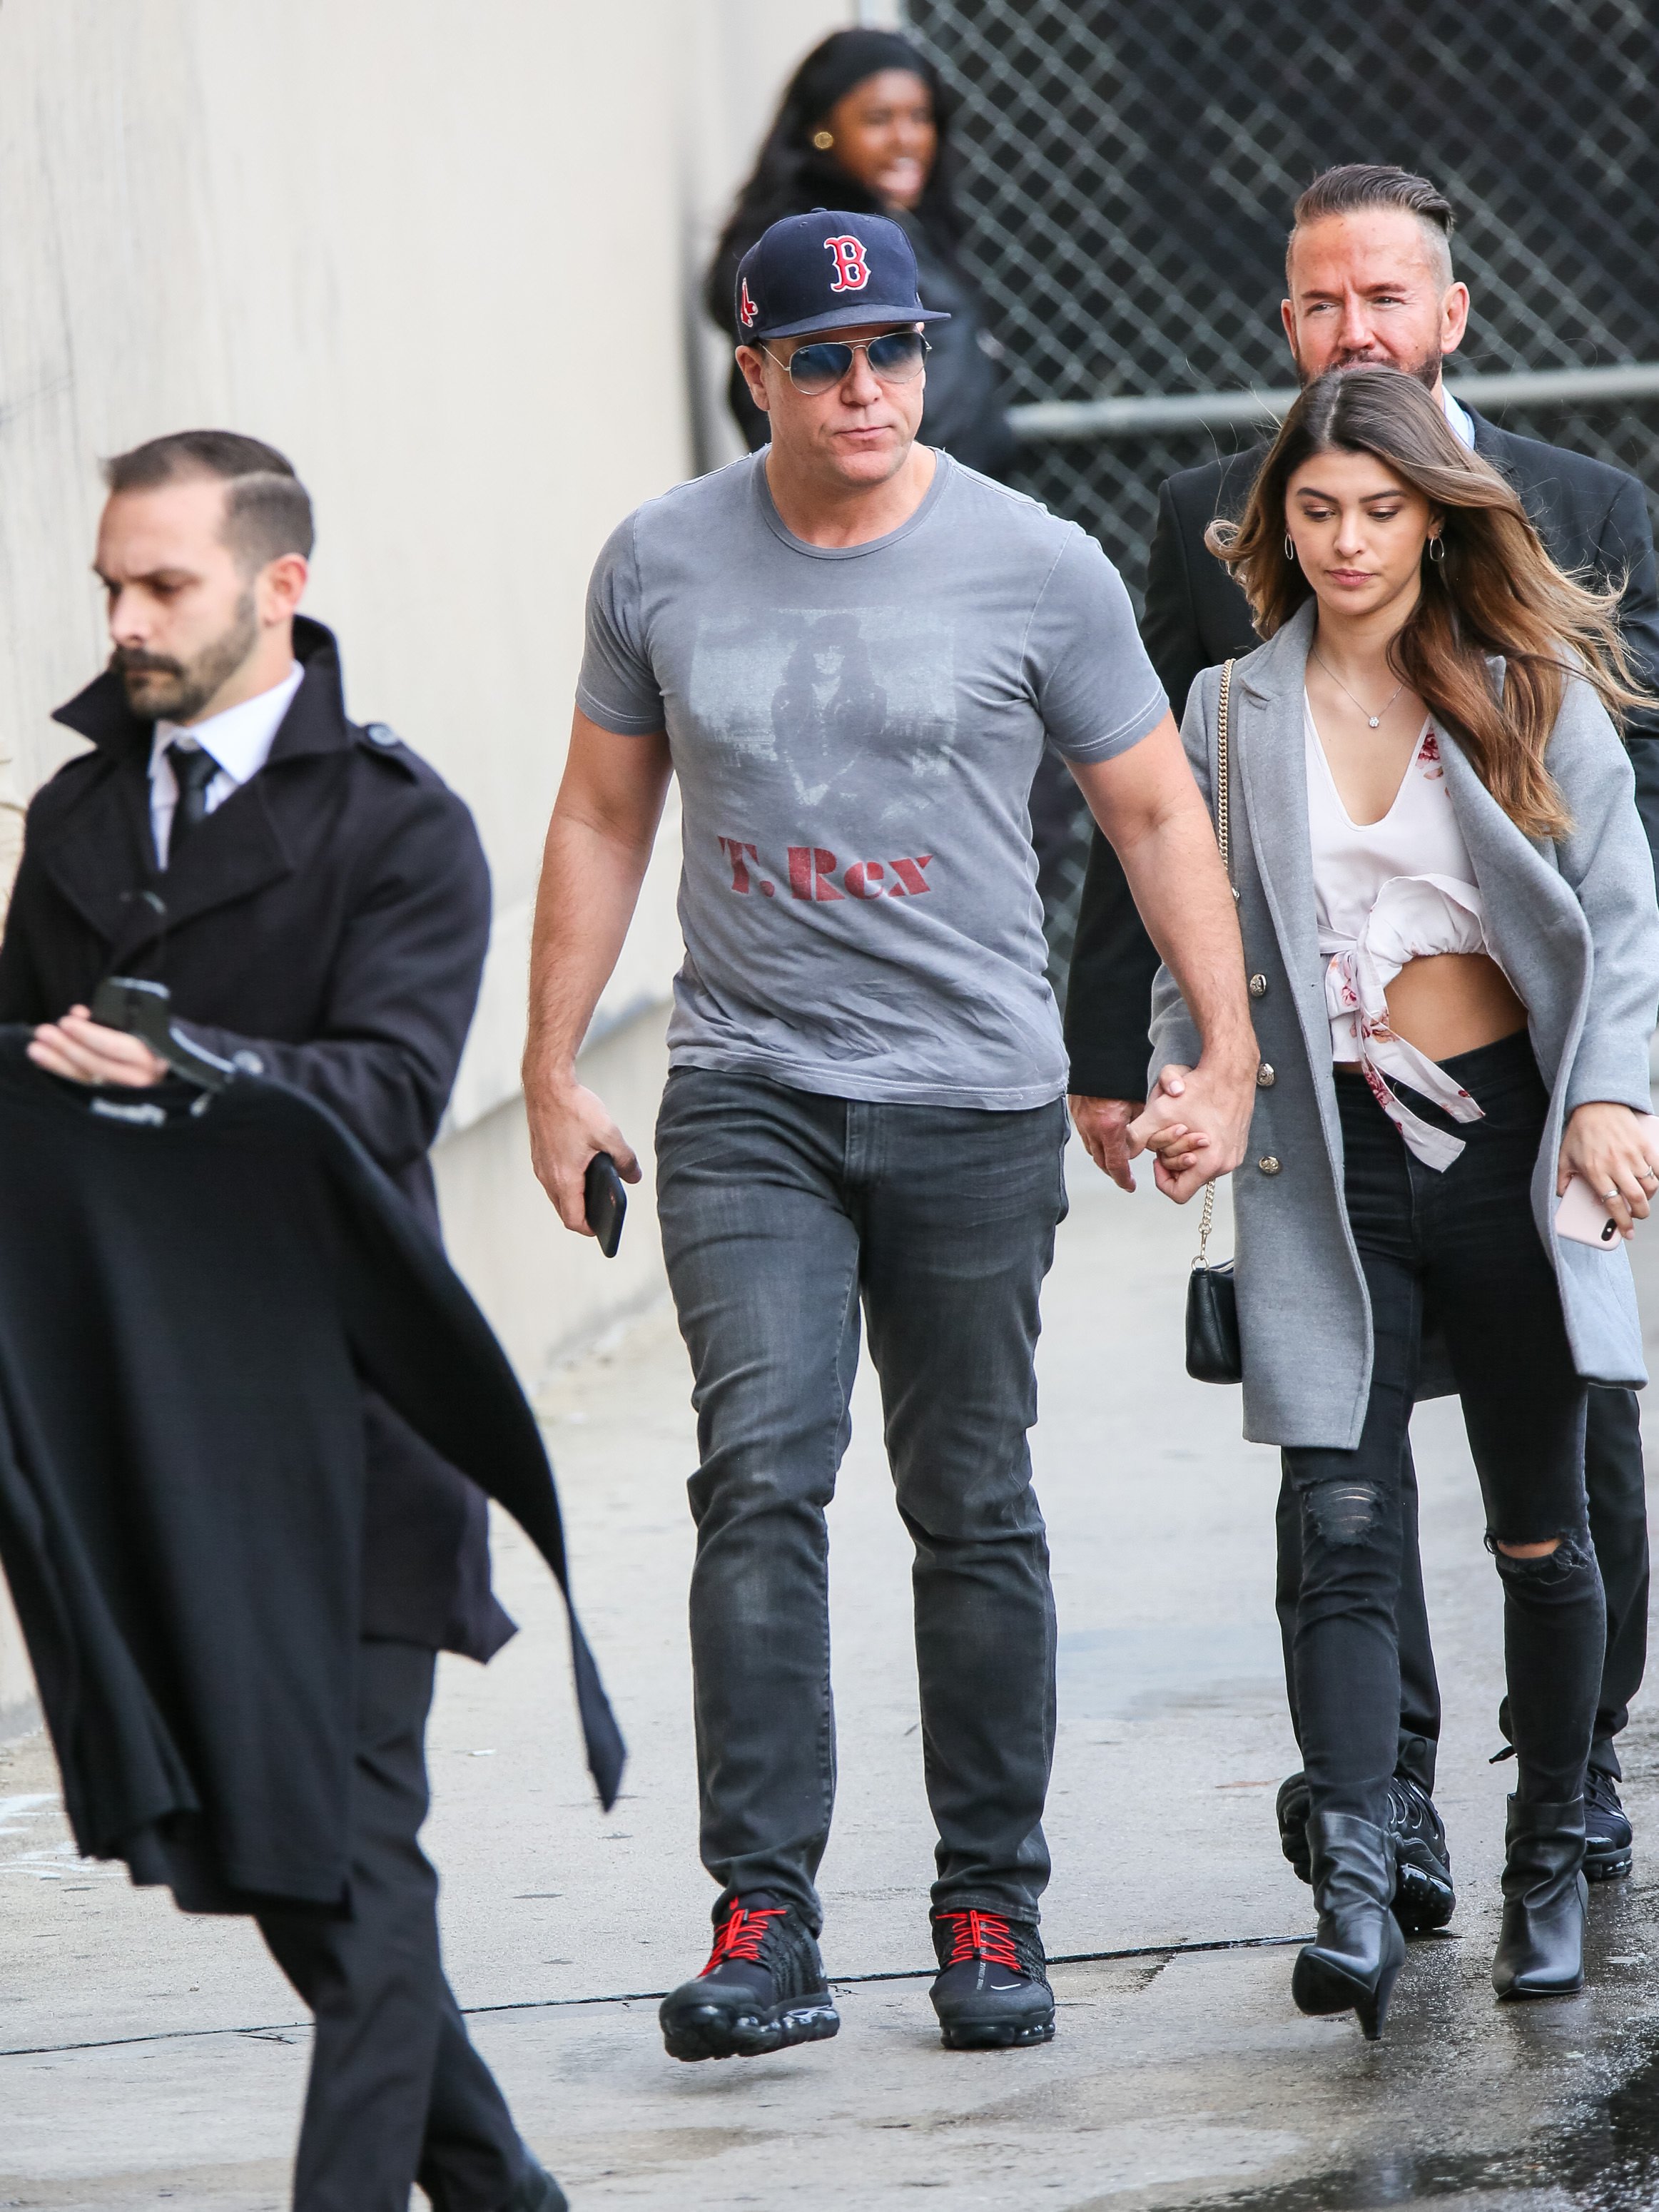 Dane Cook and Kelsi Taylor arriving on the set of “Jimmy Kimmel Live” in California on February 14, 2019 | Source: Getty Images